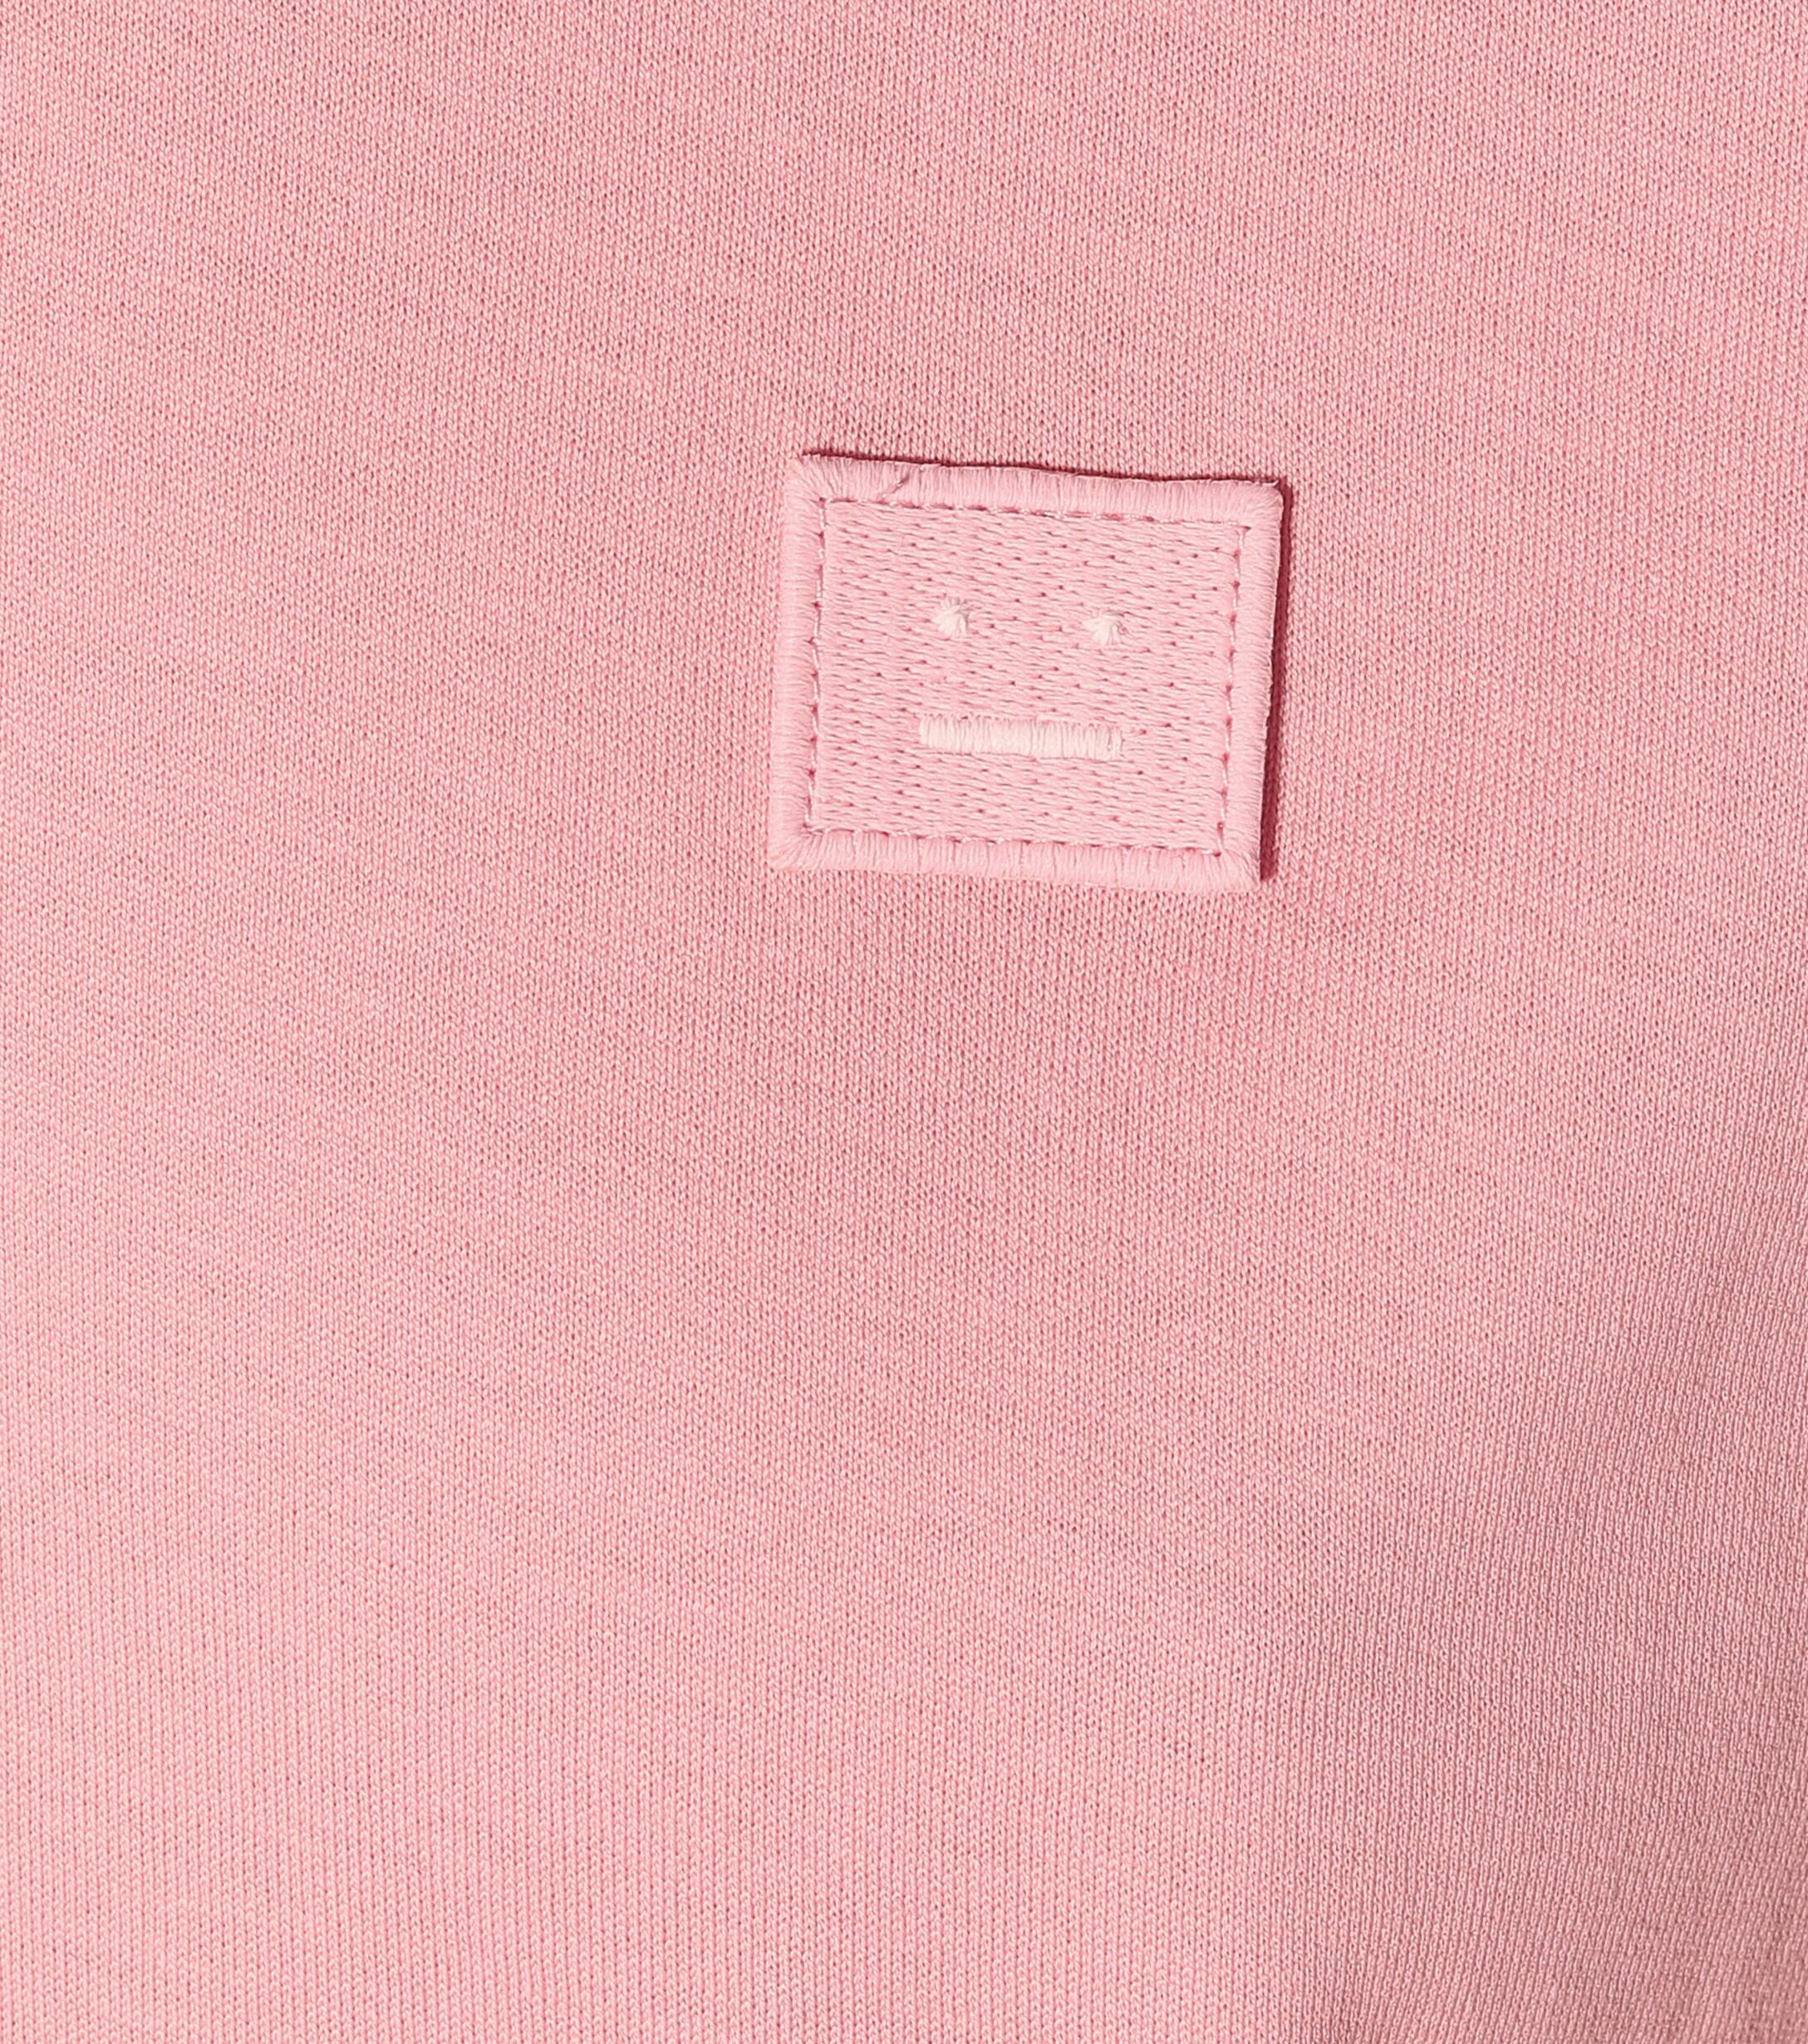 Acne Studios Face Cotton T-shirt in Pink - Lyst